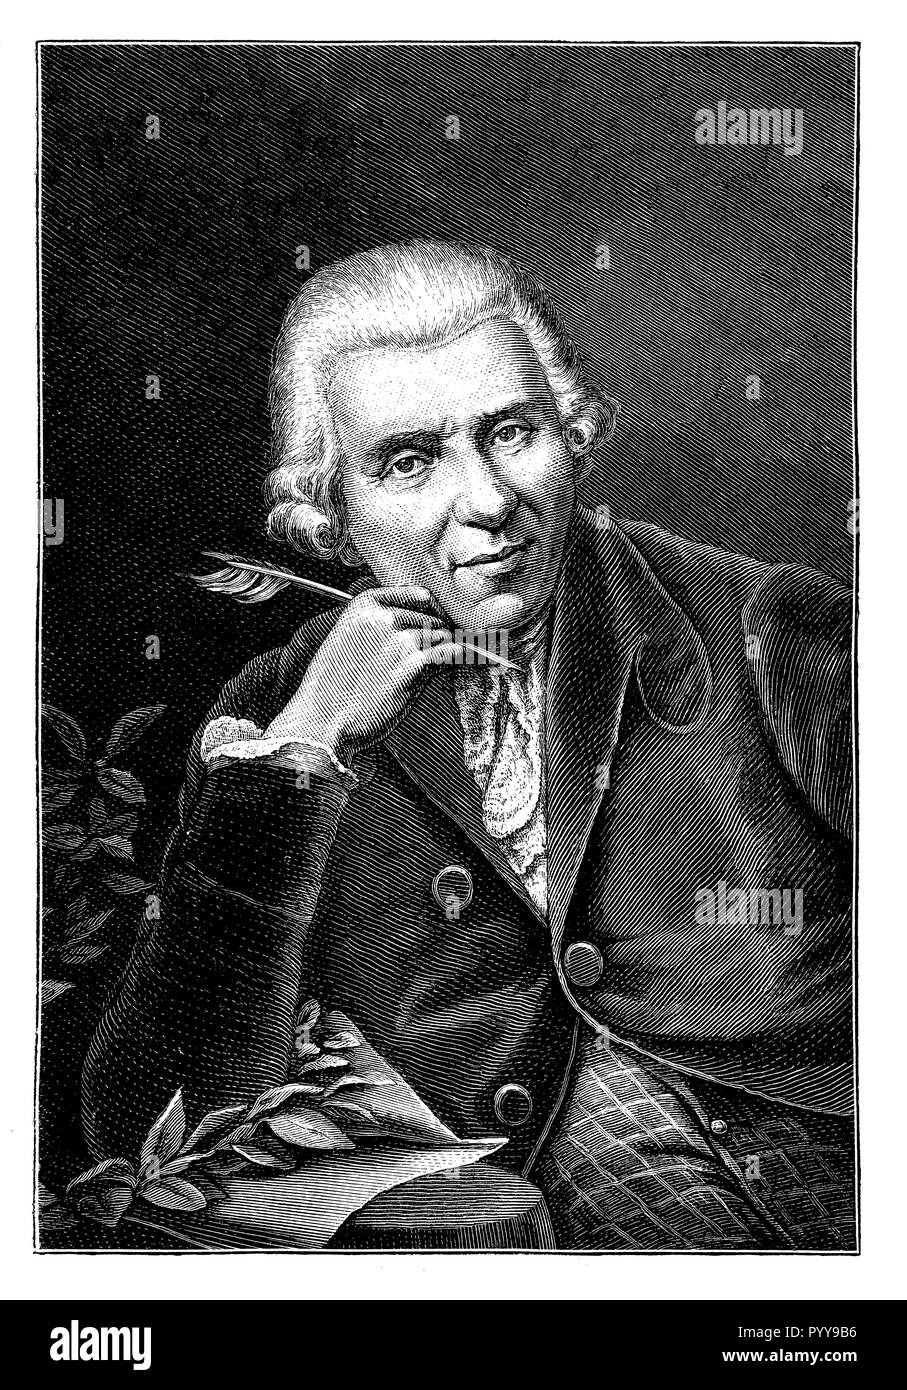 Gleim, Johann Wilhelm Ludwig (1719-1803), poet and patron of the German Enlightenment. After the painting by H. Ramberg in the temple of friendship at Halberstadt, H Ramberg  1881 Stock Photo